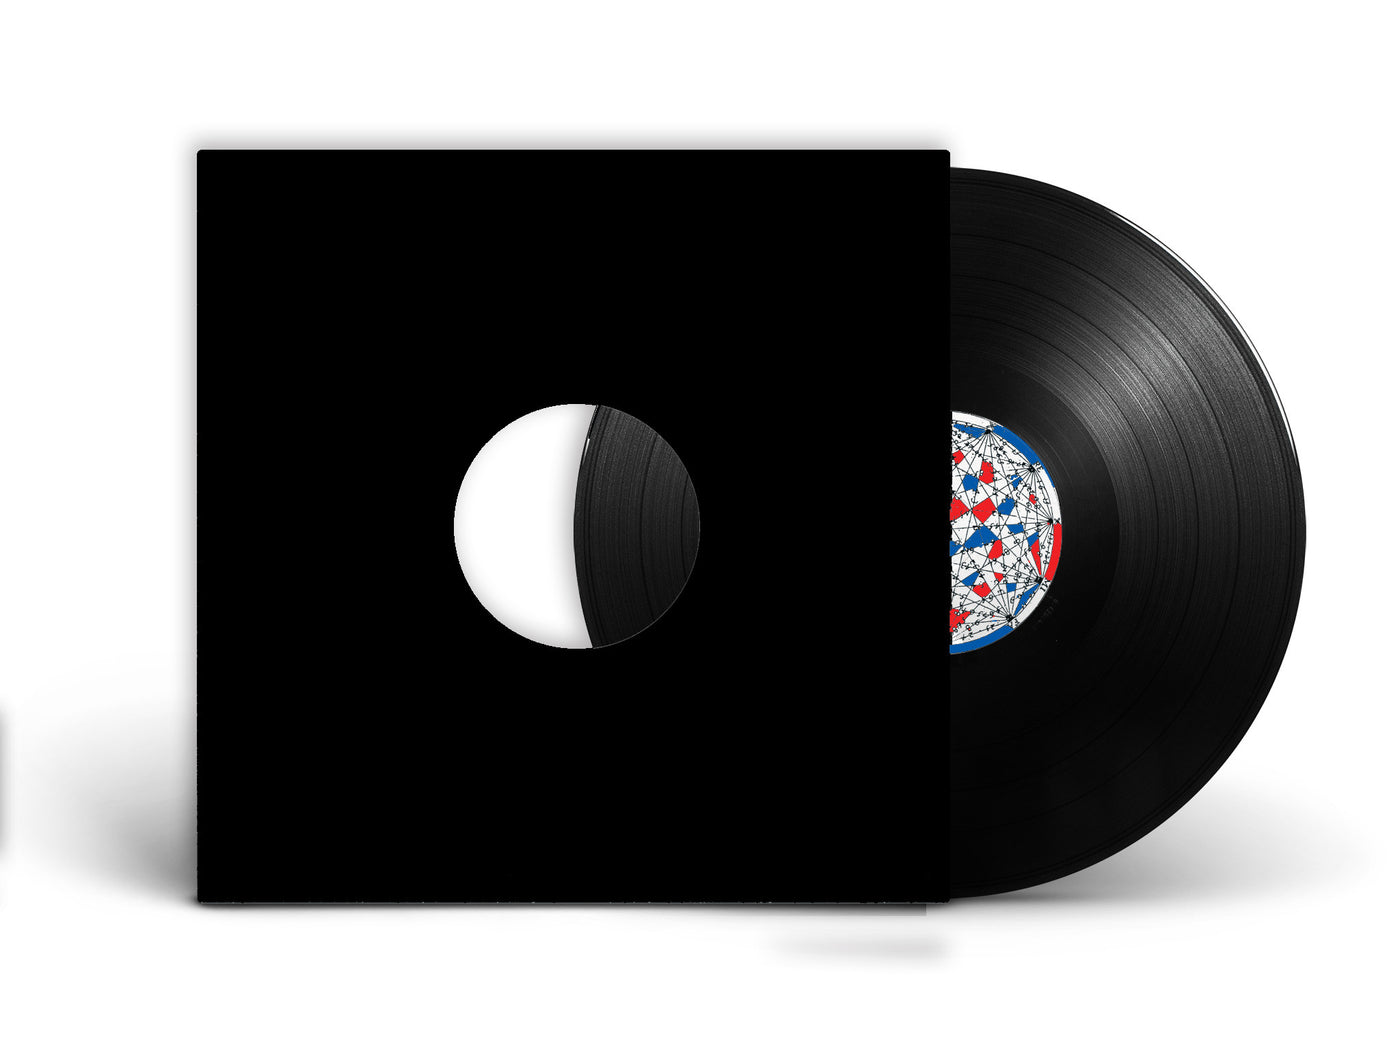 12" Vinyl Records in Black or White Jackets